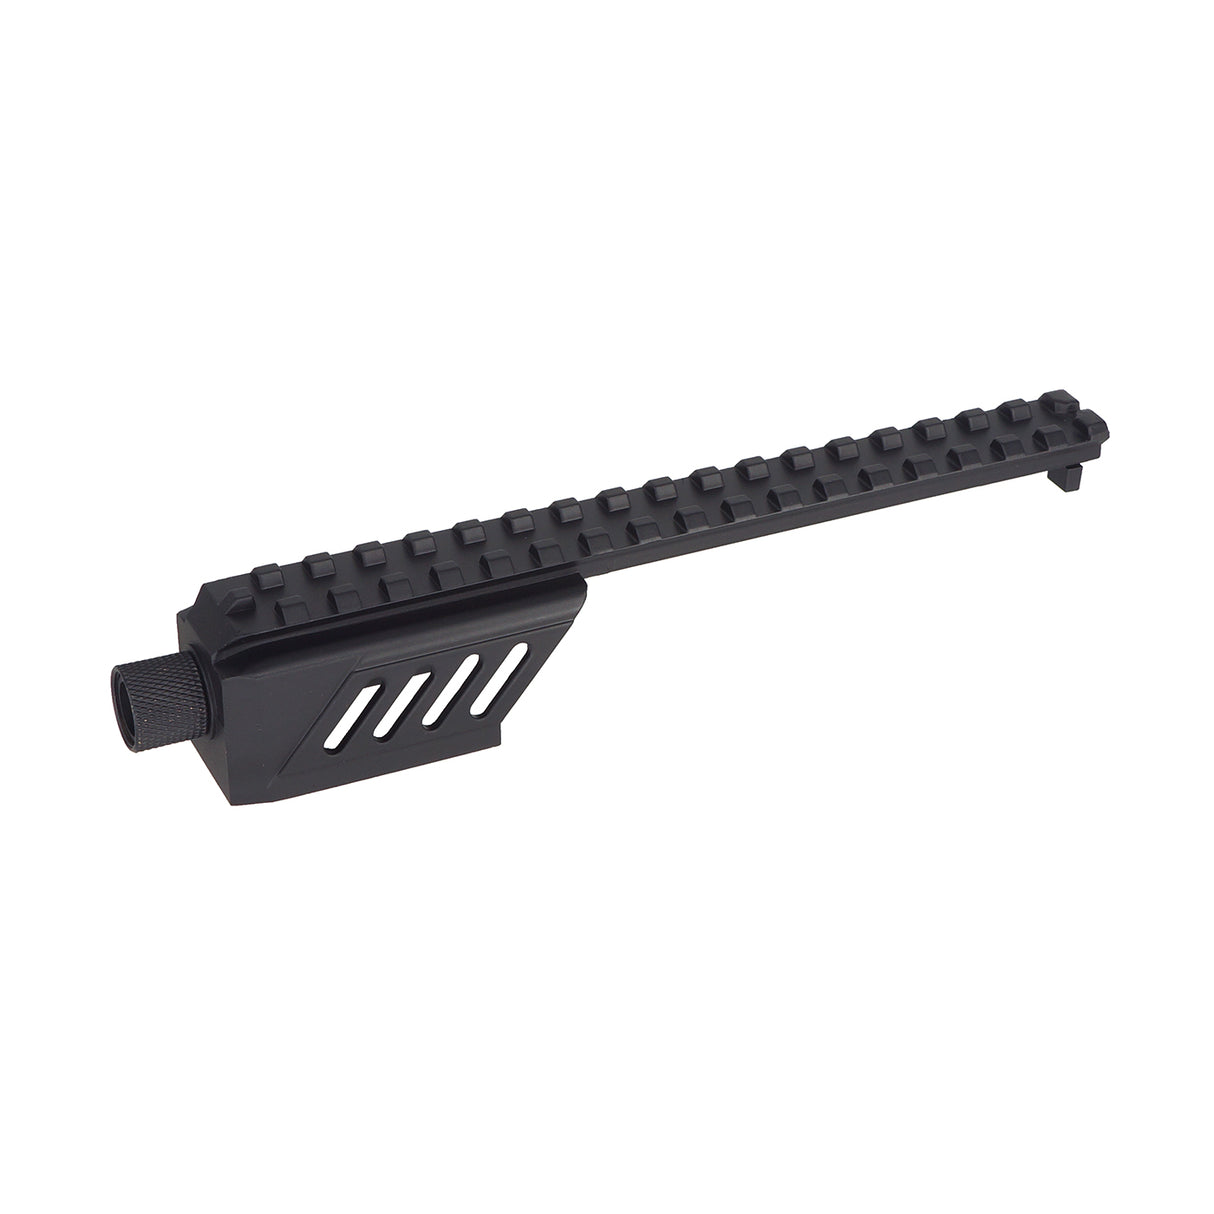 CYMA Tactical Rail with Muzzle Adapter for G18C AEP ( CYMA-C29A )